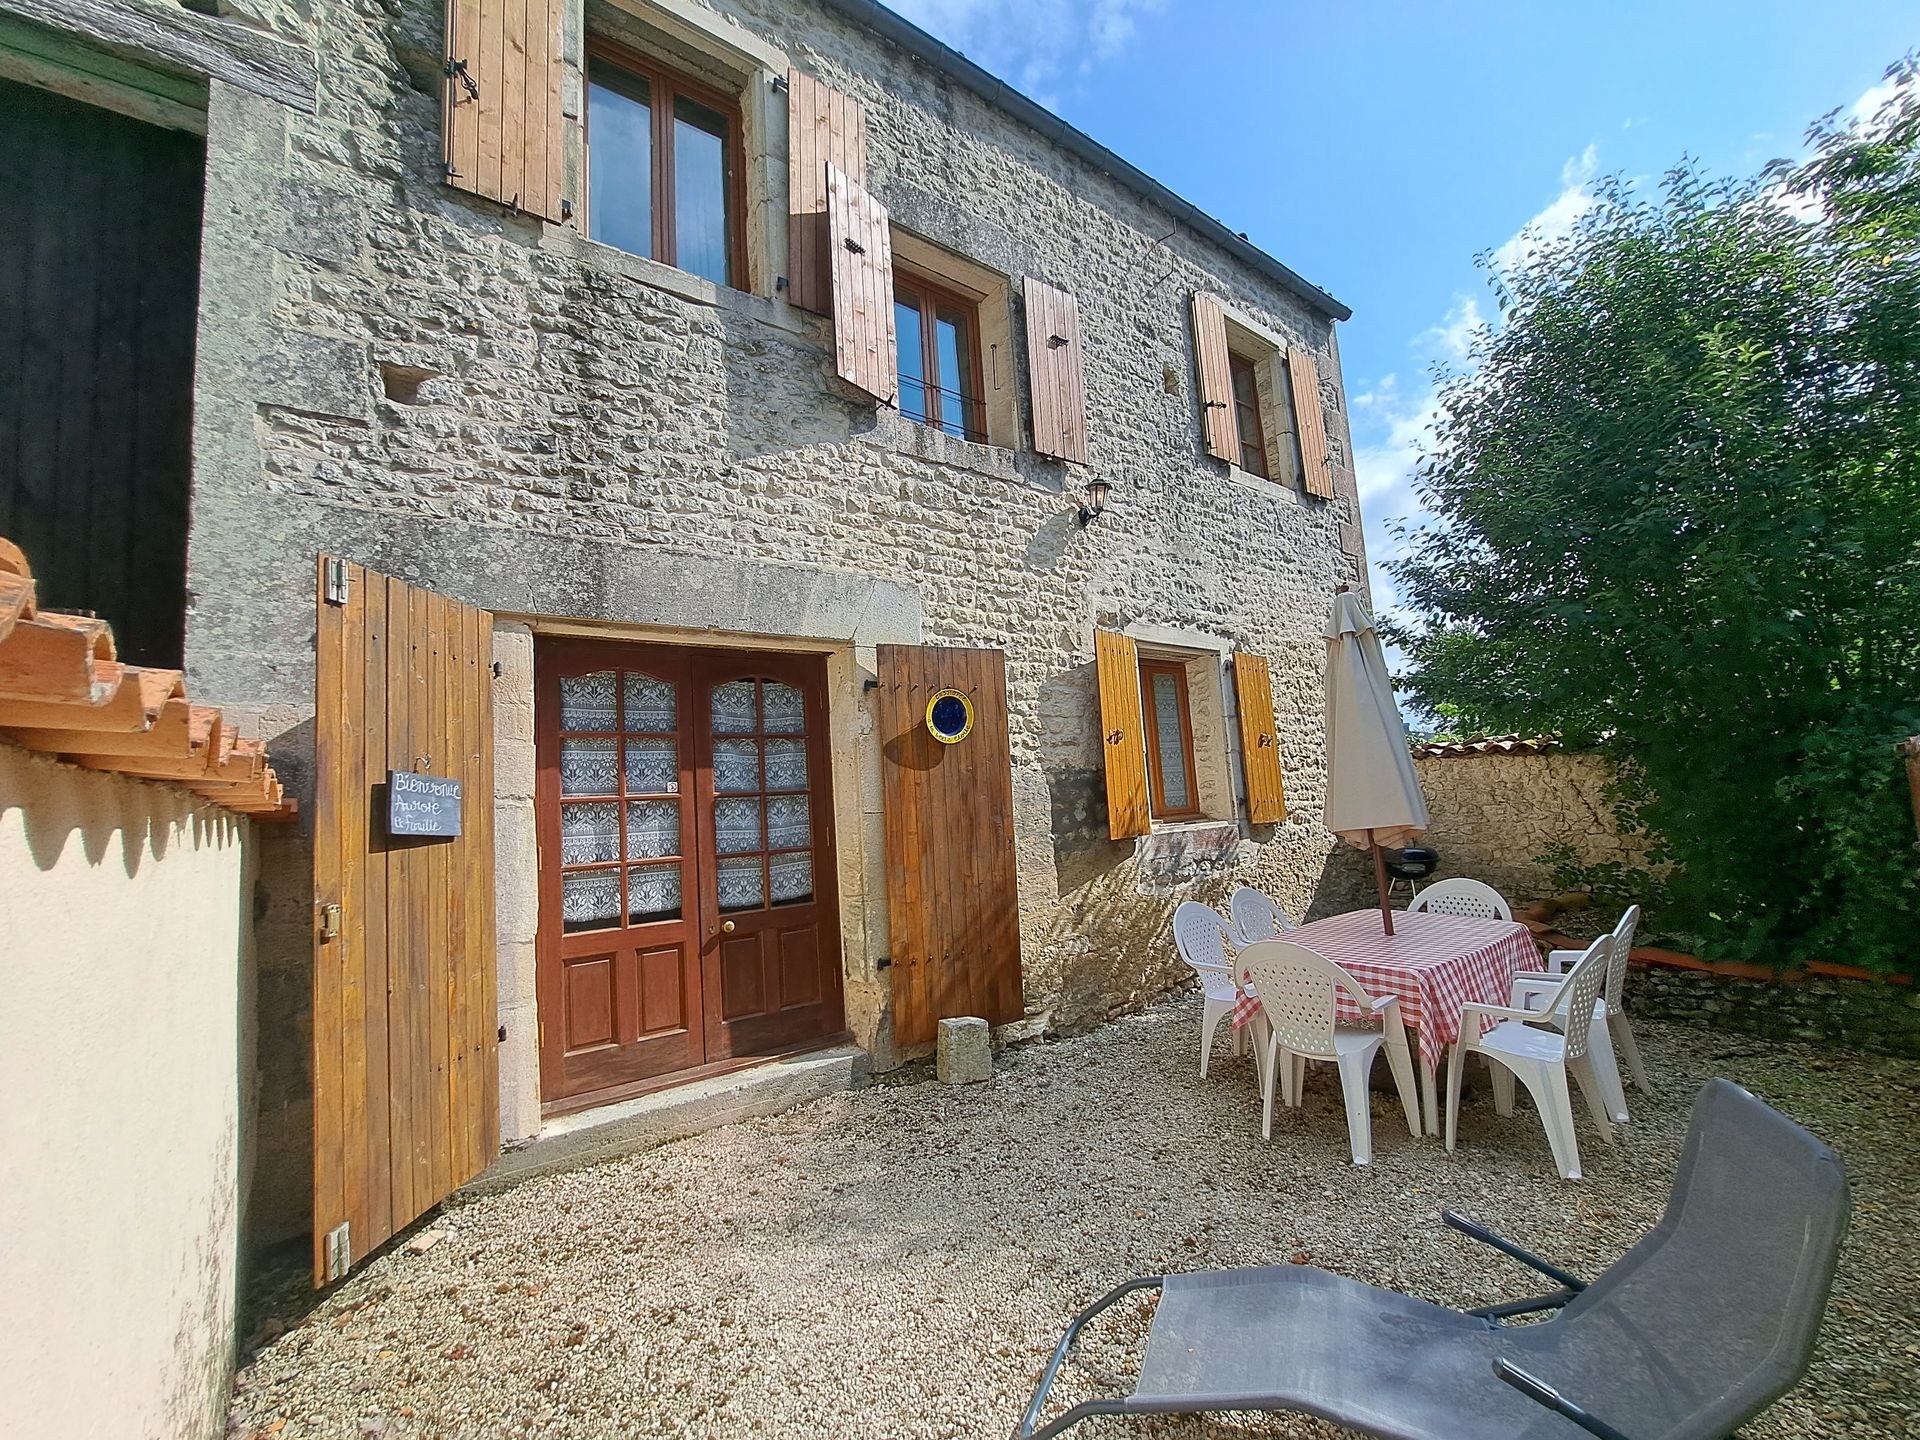 stone holiday cottage in France with wooden shutters